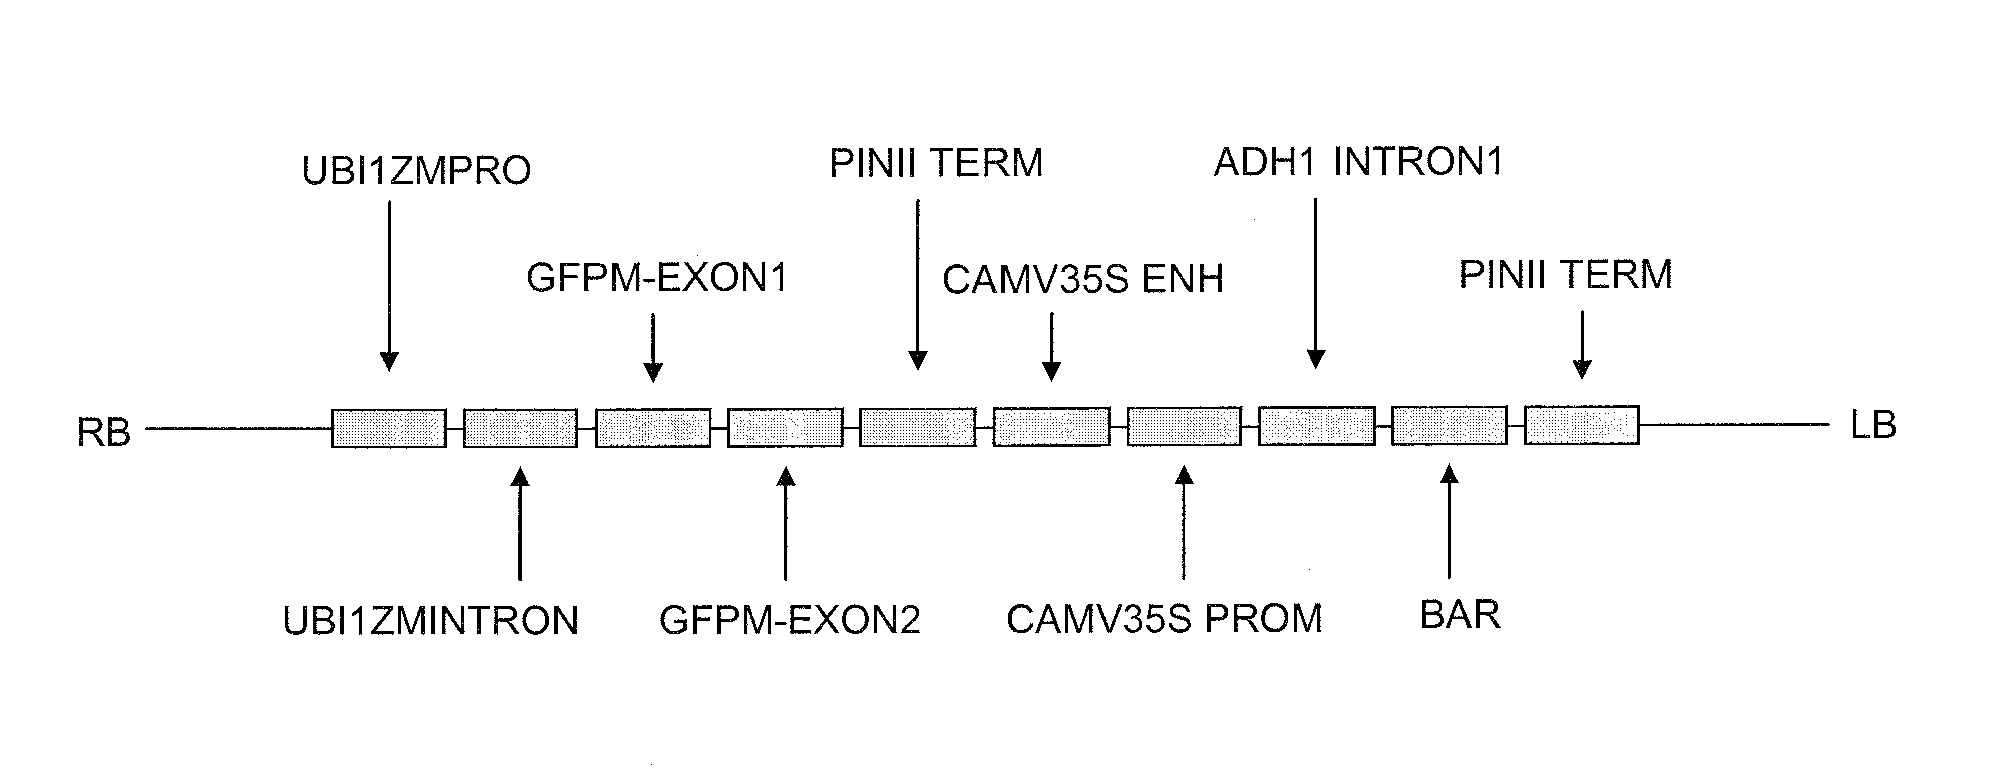 Production of progenitor cereal cells